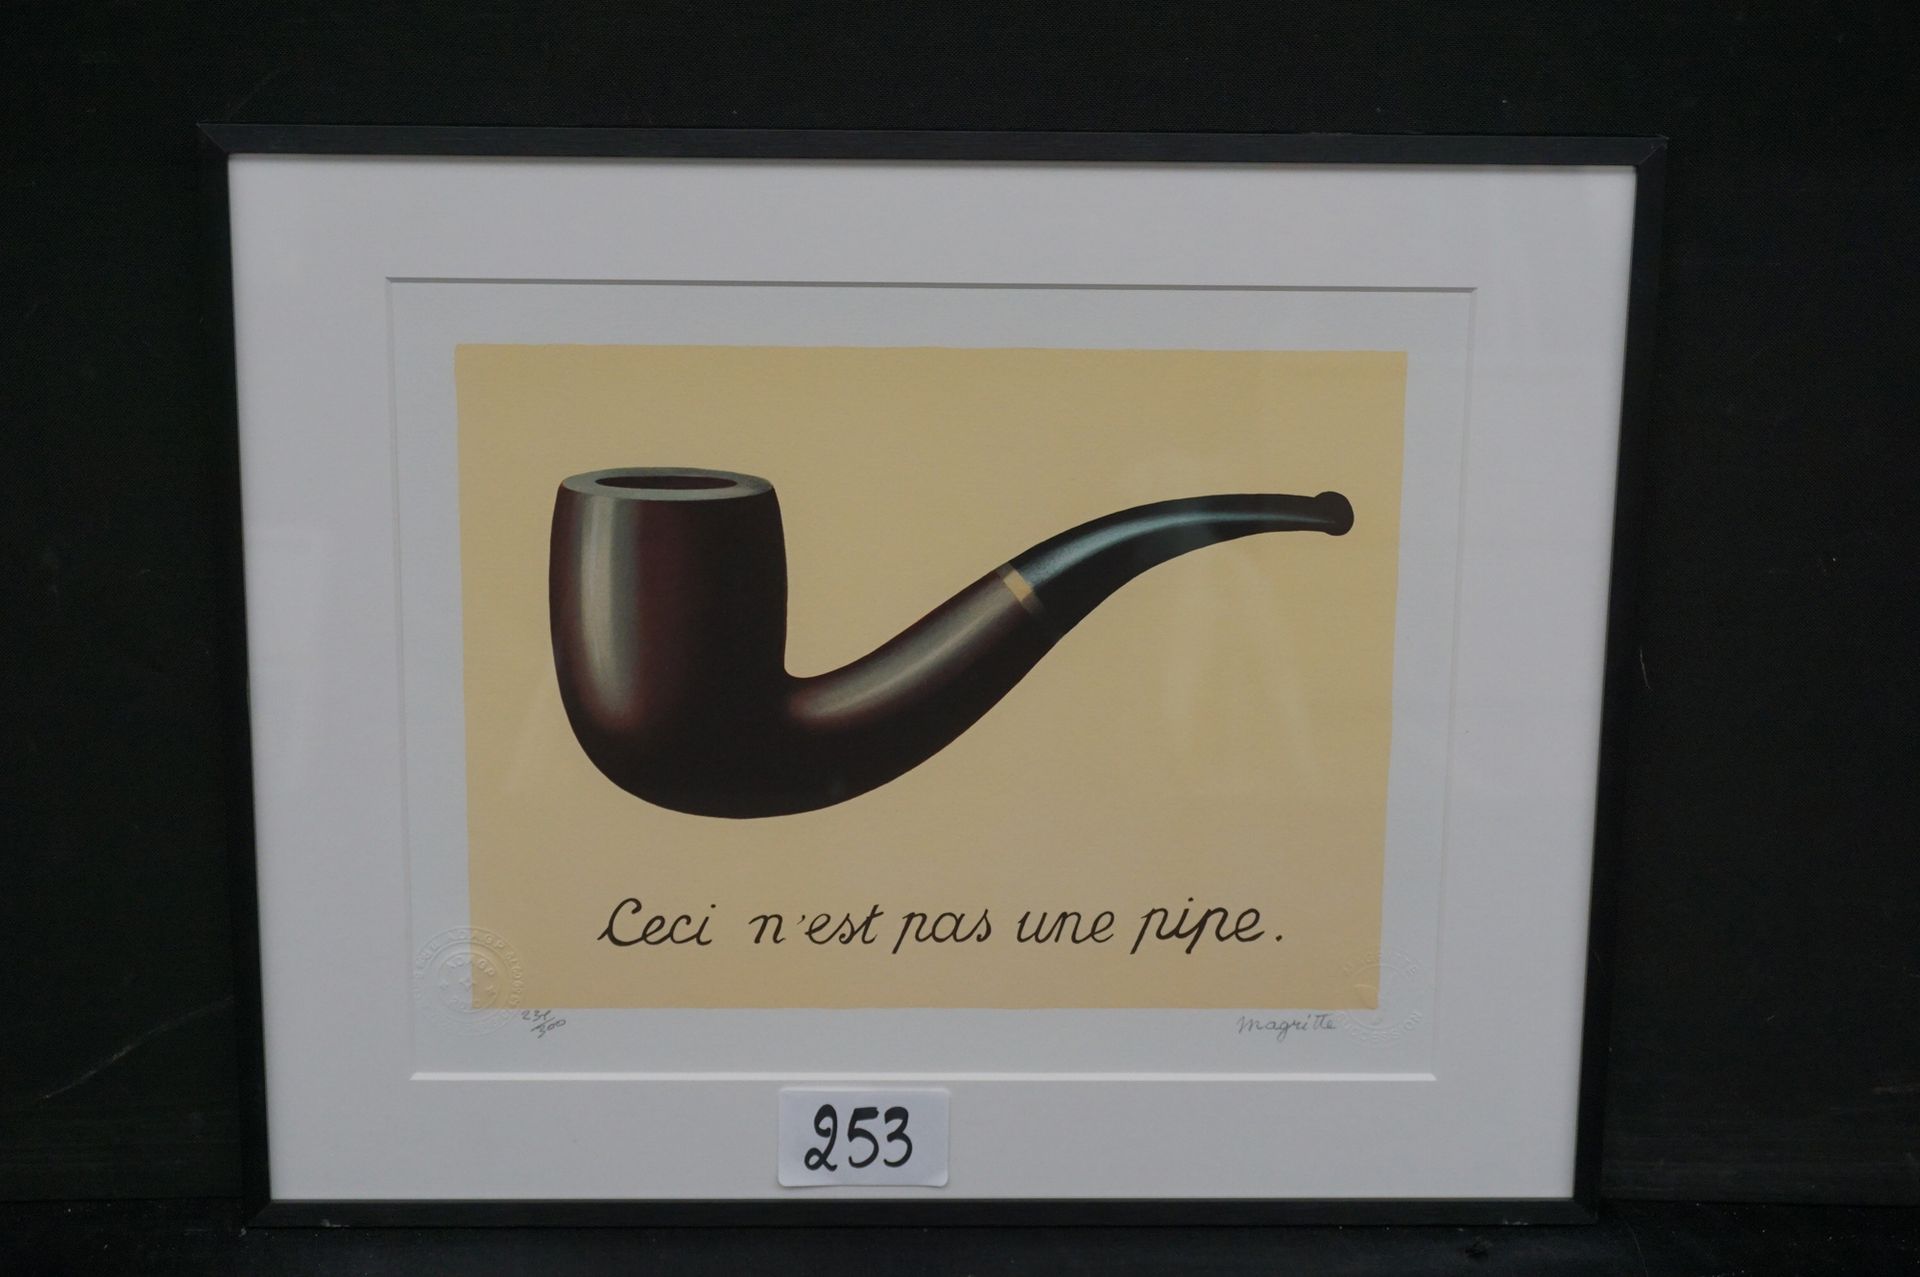 RENE MAGRITTE (1898 - 1967) "Ceci n'est pas une pipe" - Lithograph - Signed - Nu&hellip;